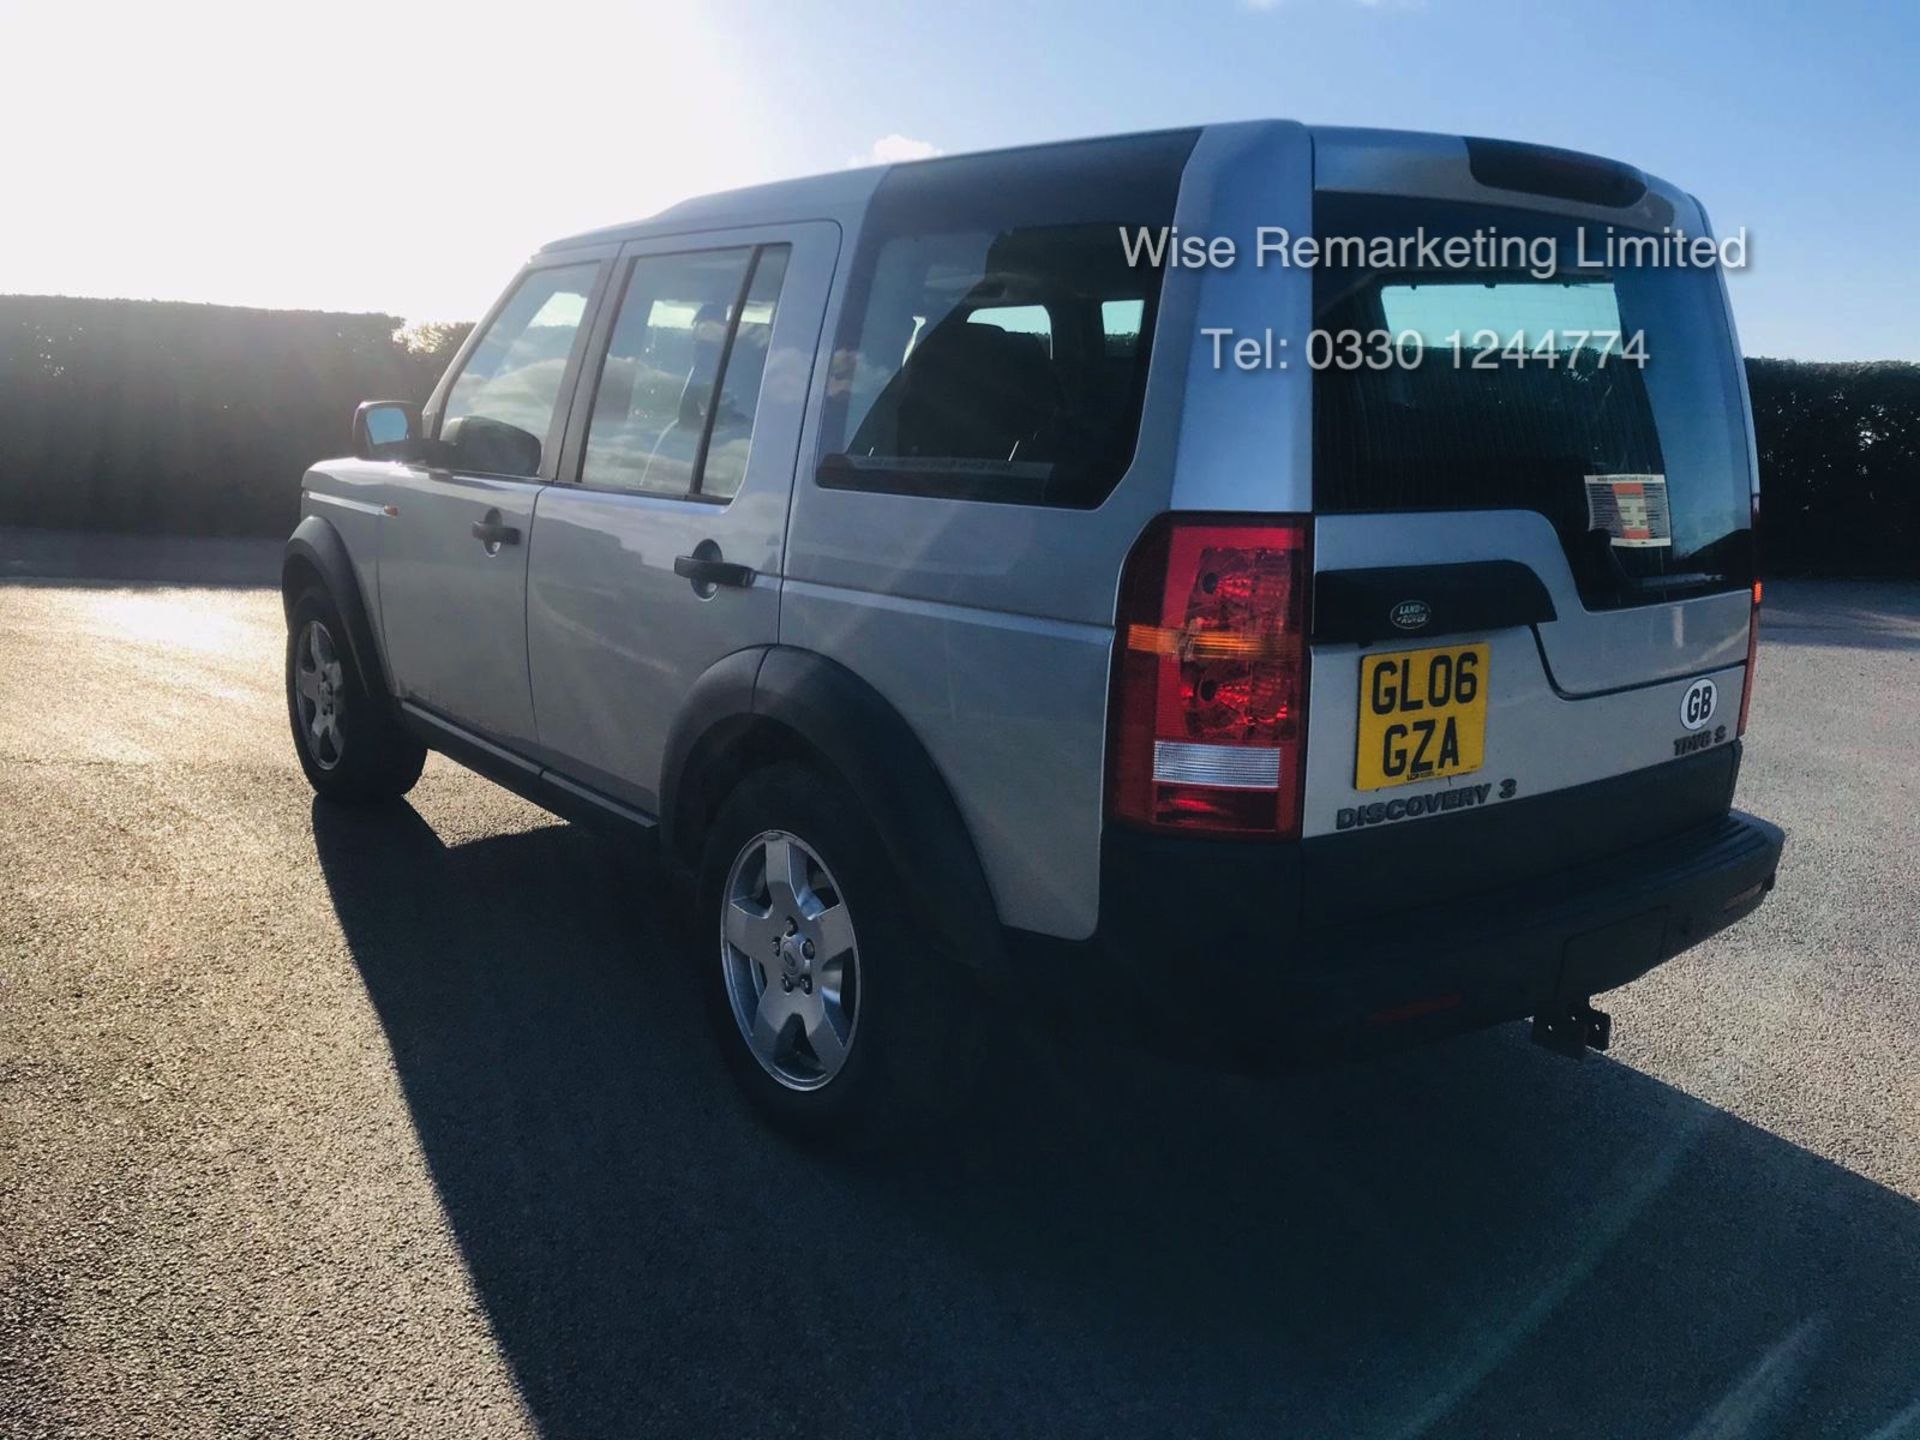 (RESERVE MET) Land Rover Discovery 3 2.7 TDV6 S - 2006 06 Reg - 7 Seater - Service History - - Image 3 of 18